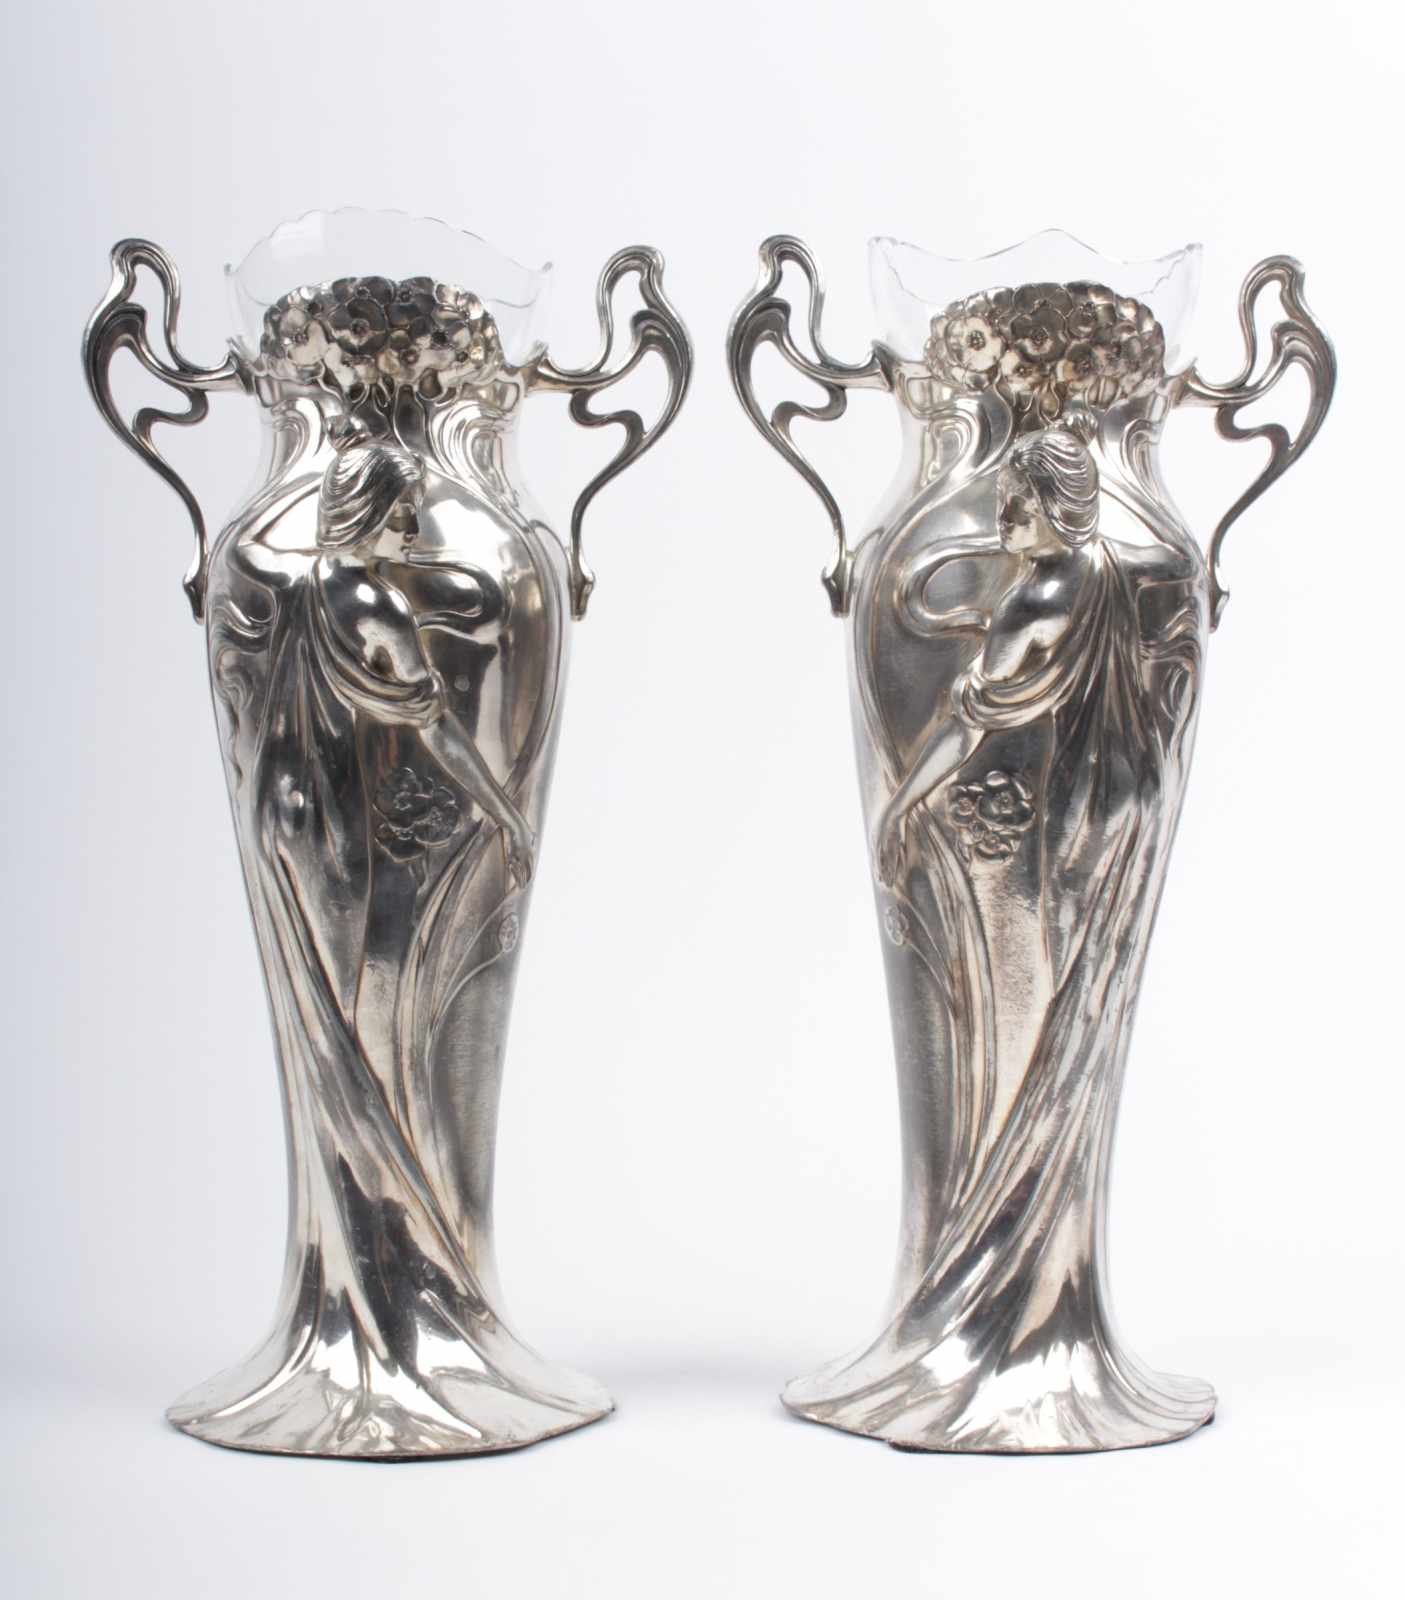 Art Nouveau vases WMF Germany, around 1906, paired pewter vases, silver plated, original glass